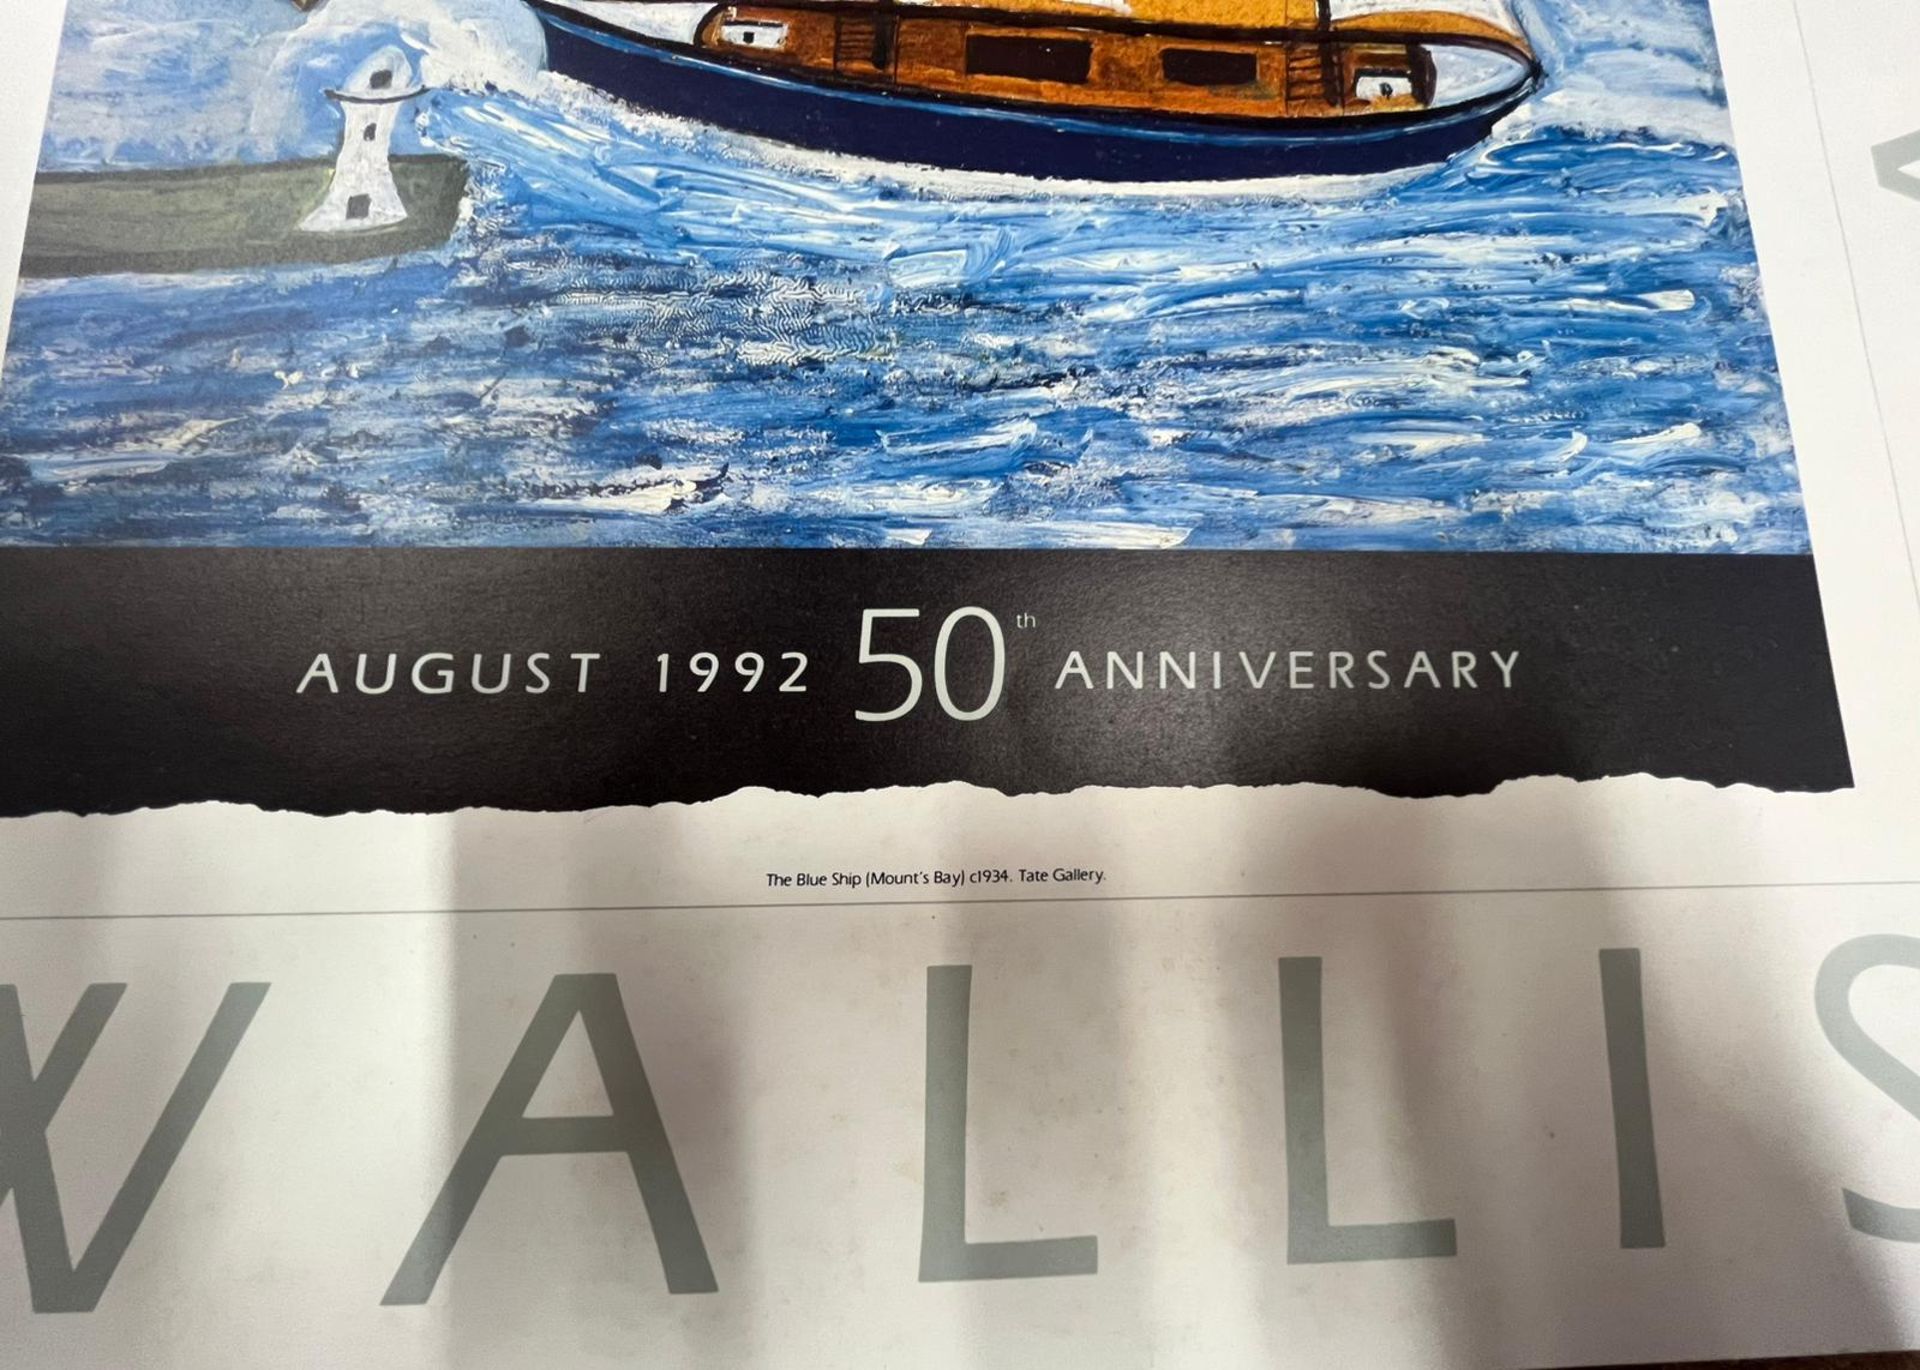 AFTER ALFRED WALLIS (1855-1942) - 50TH ANNIVERSARY GALLERY POSTER - Image 2 of 3